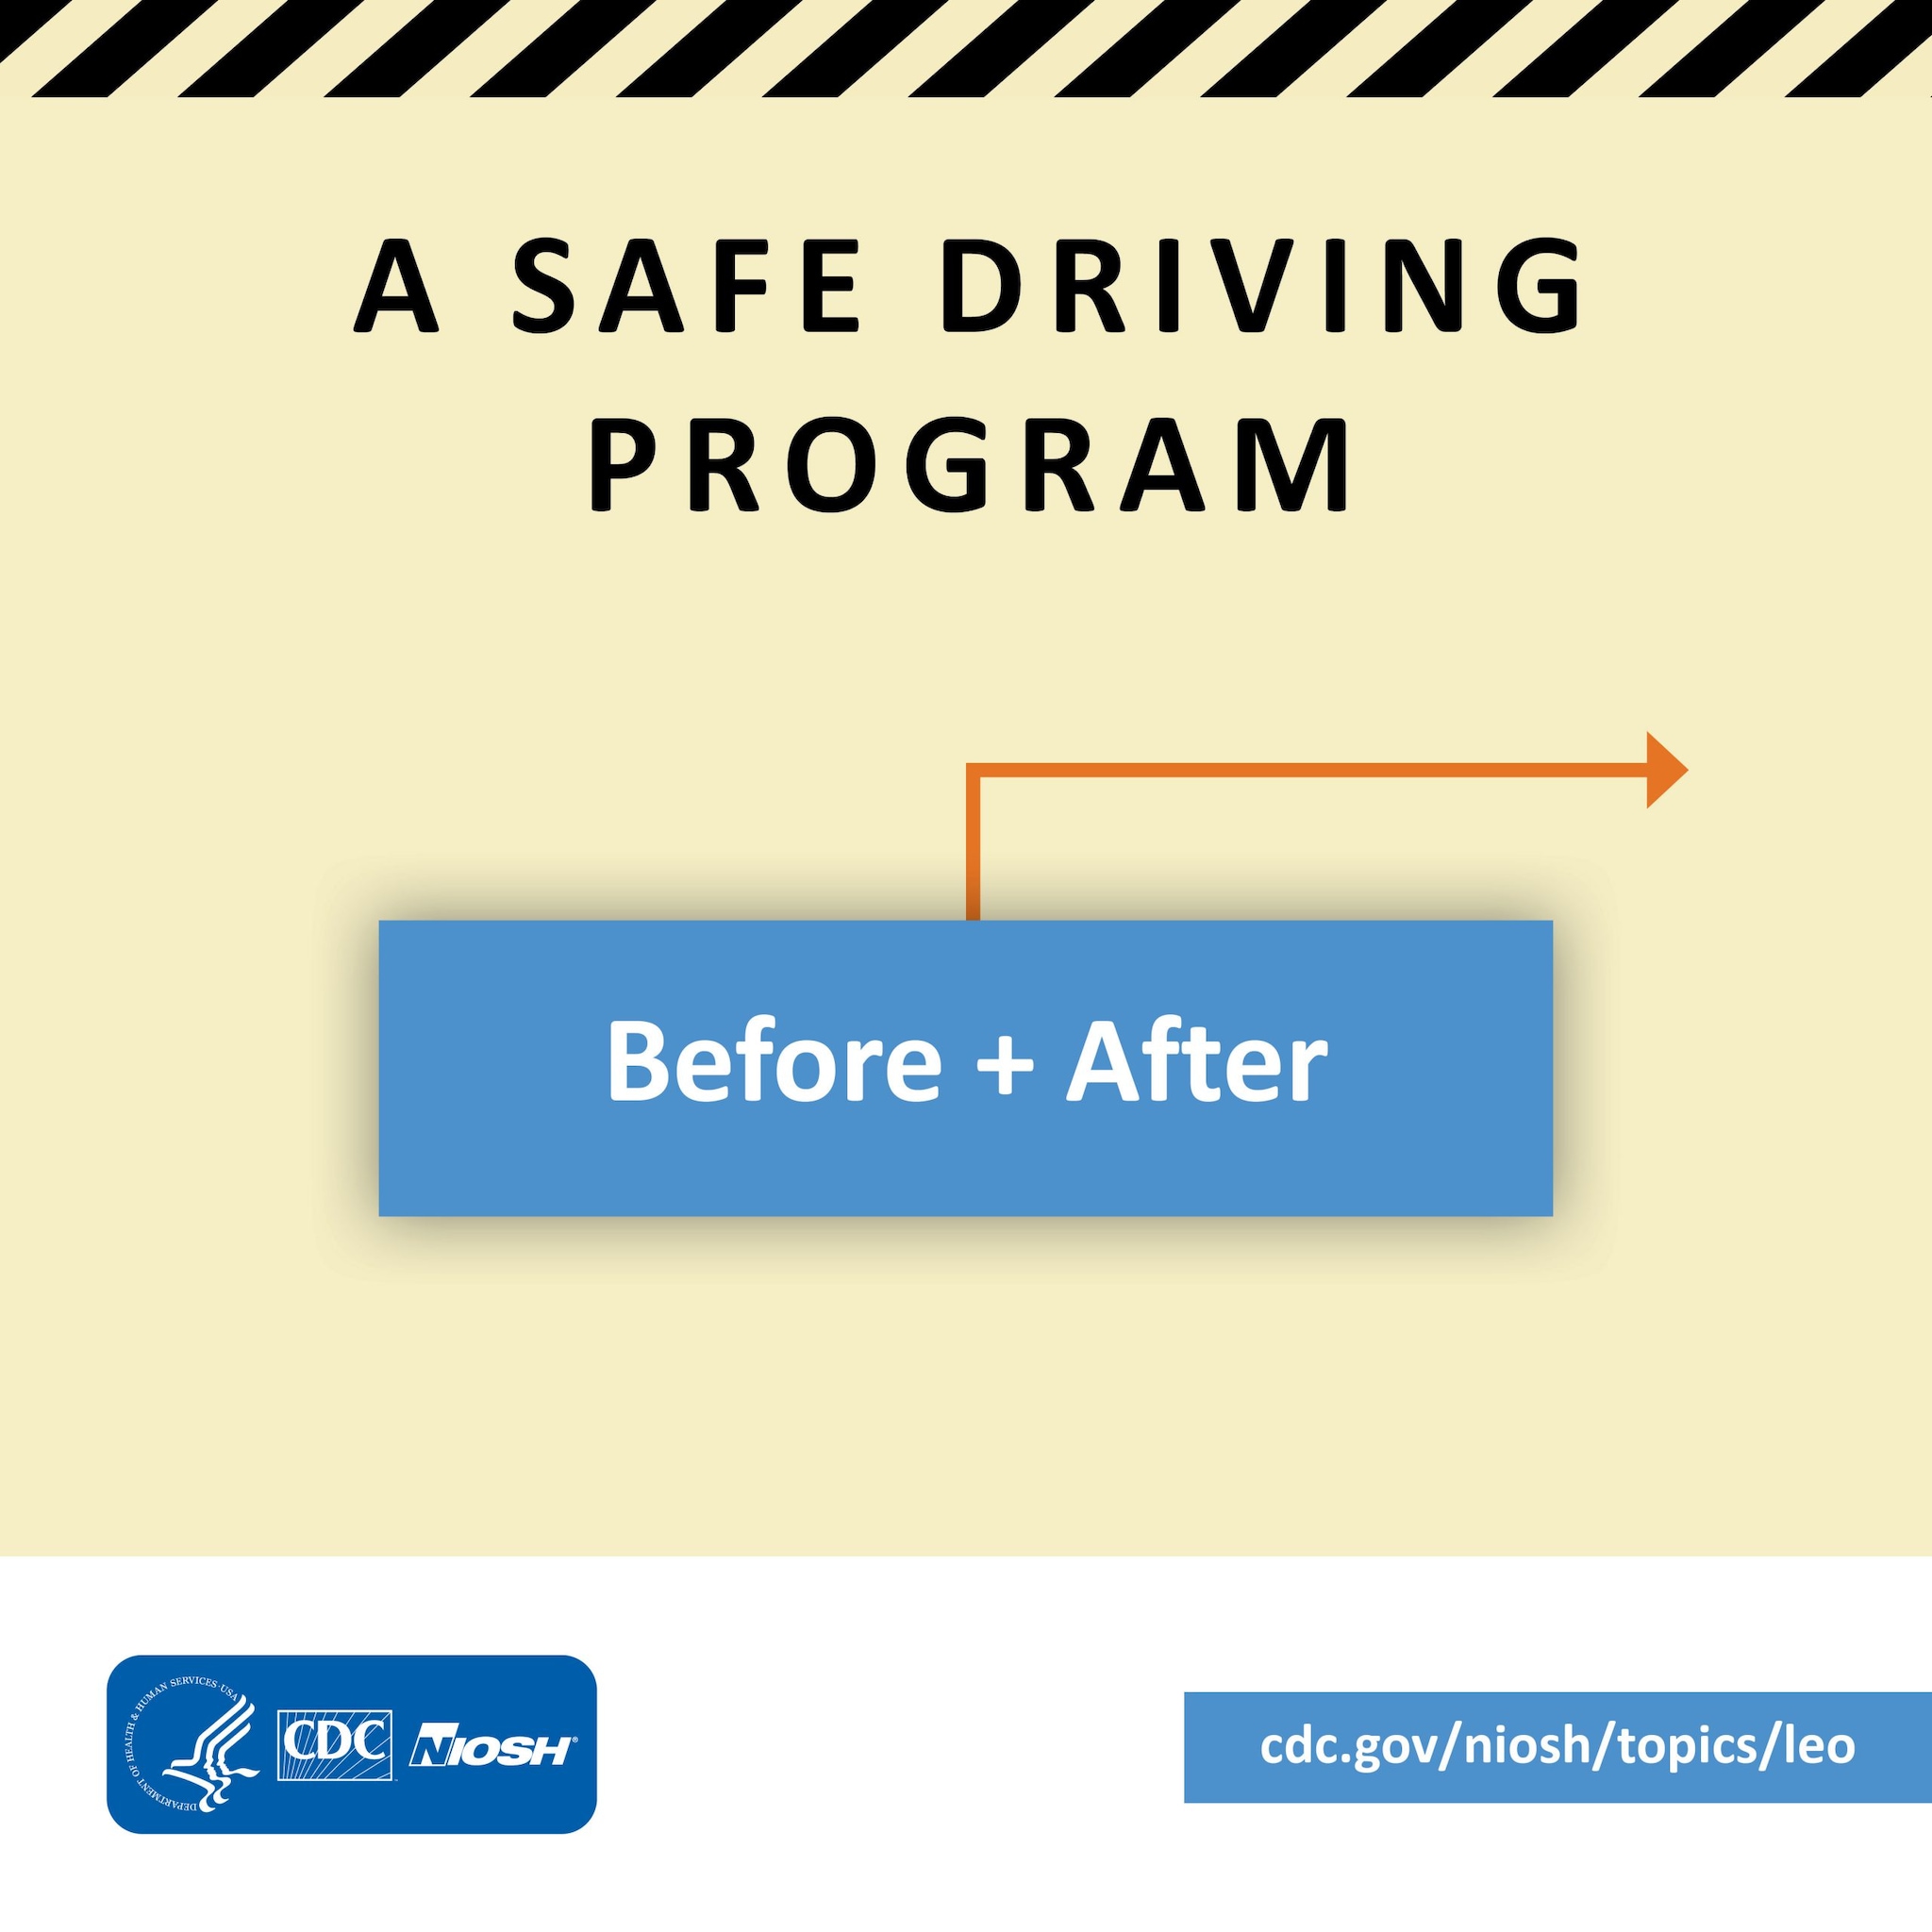 A Safe Driving Program: Before + After